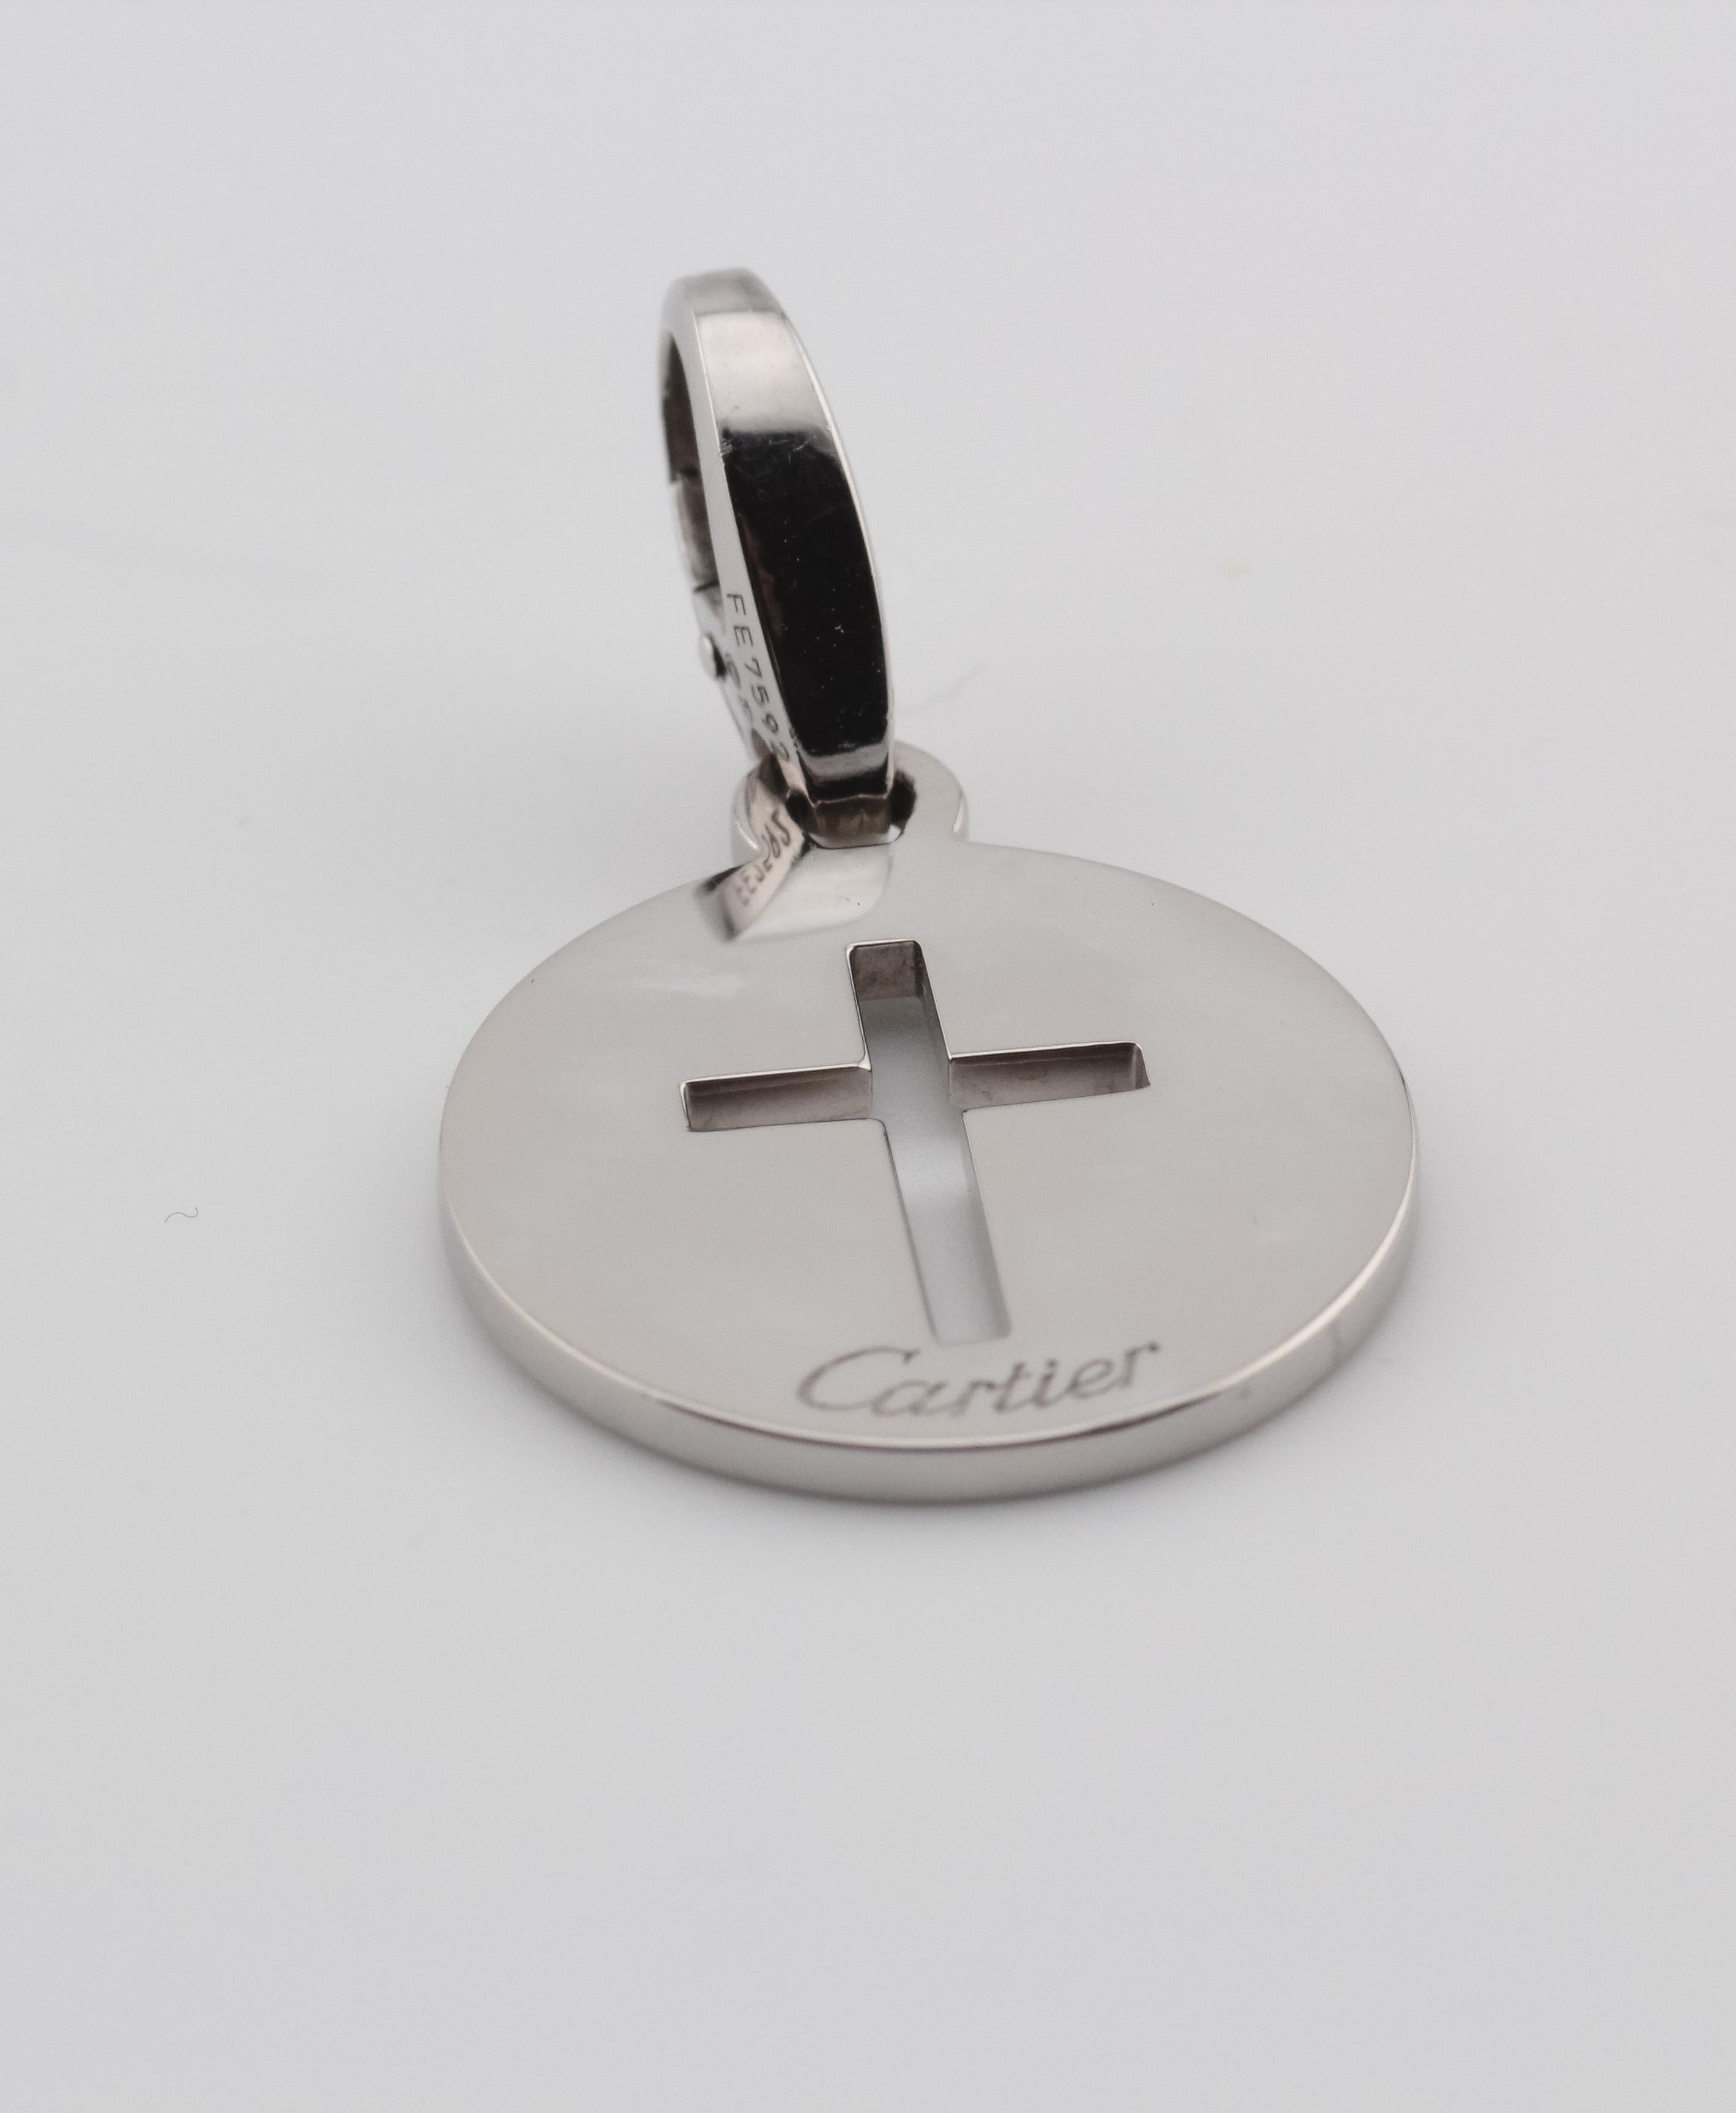 Cartier 18K White Gold Cross Charm Pendant In Good Condition For Sale In Bellmore, NY